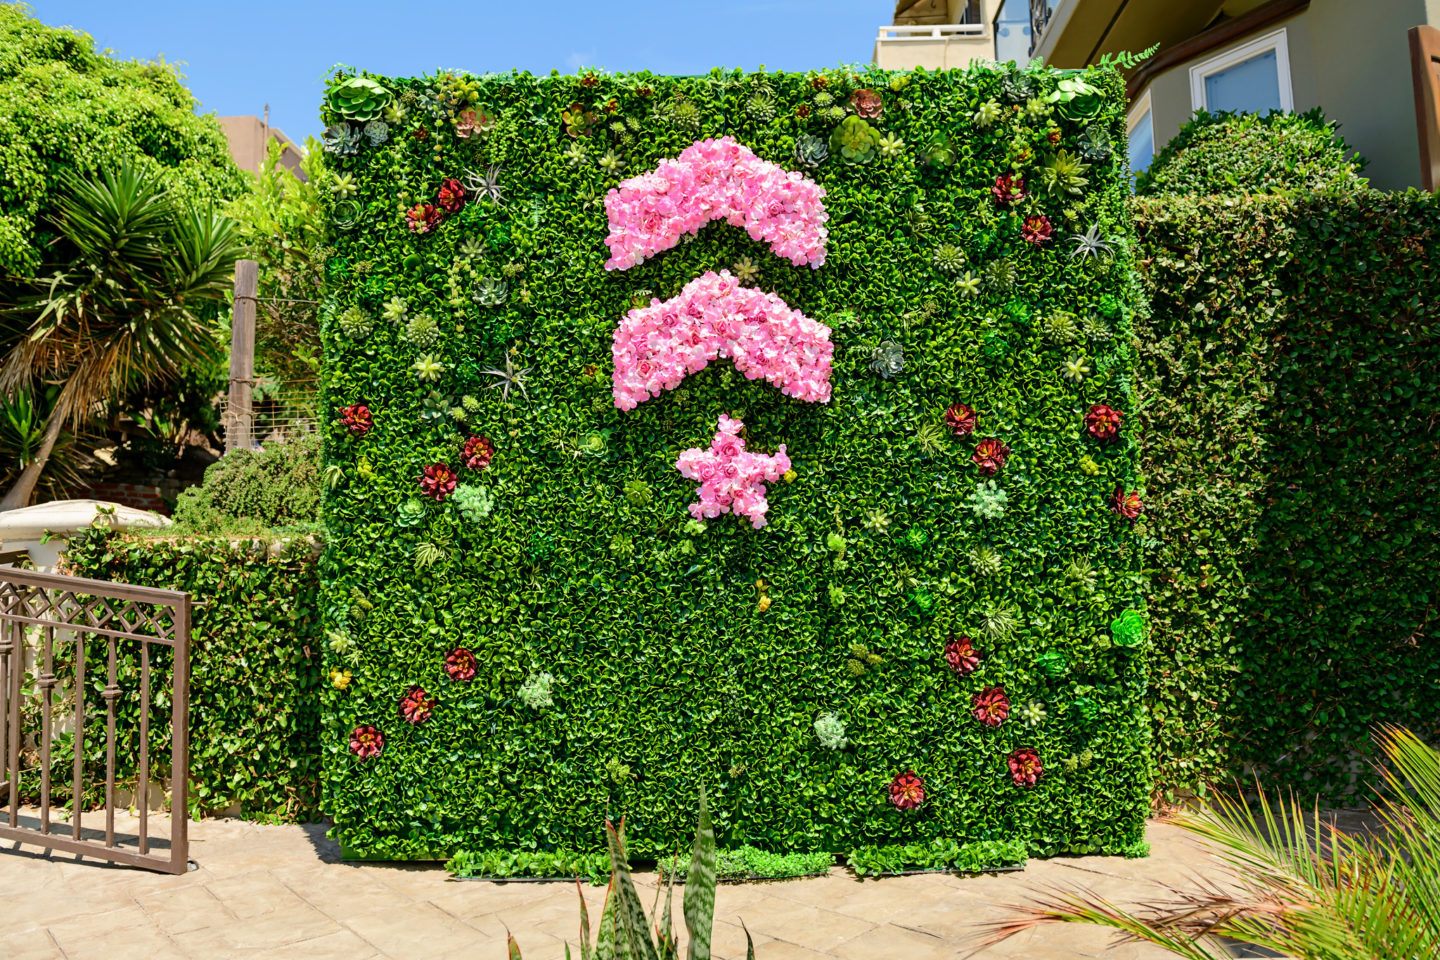 Pink Barry's Bootcamp upward arrows and star logo made of flowers on green living wall